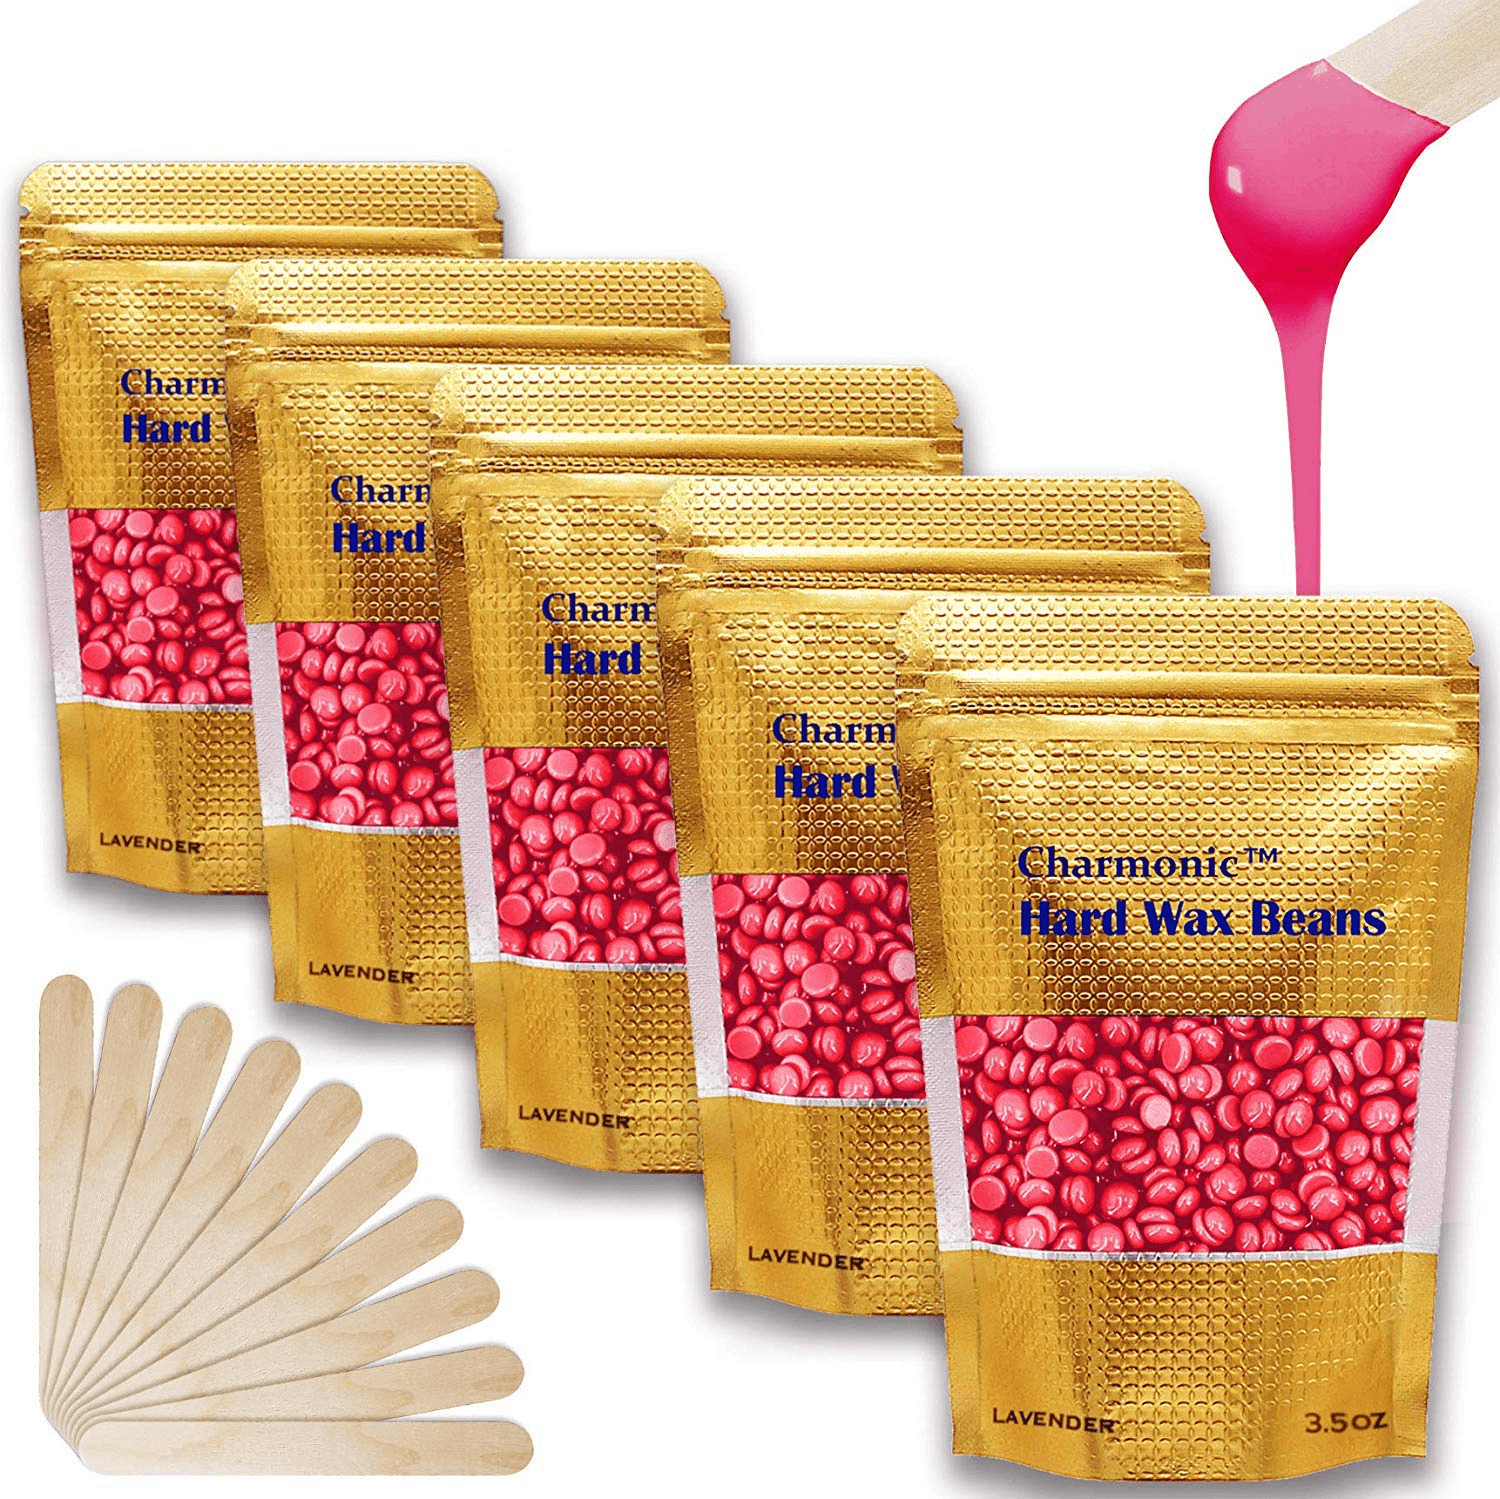 MICHPONG Hard Wax Beads for Hair Removal, Natural Beeswax Wax Beans for  Sensitive Skin, 100g Rose 